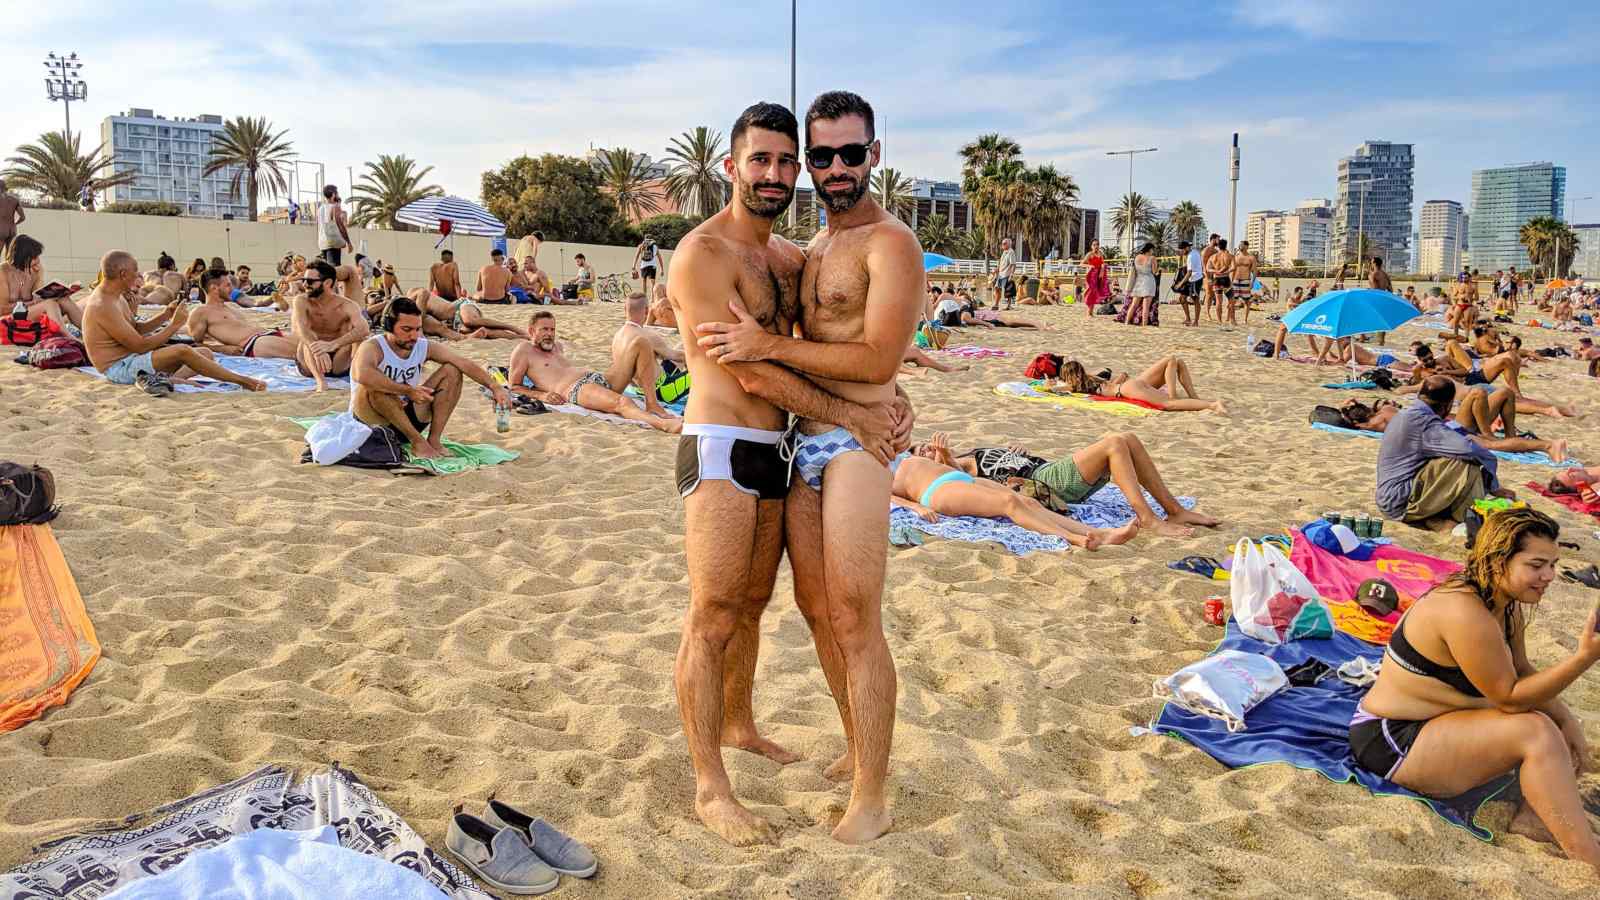 Mar Bella is one of the most busy and popular gay nude beaches in Barcelona